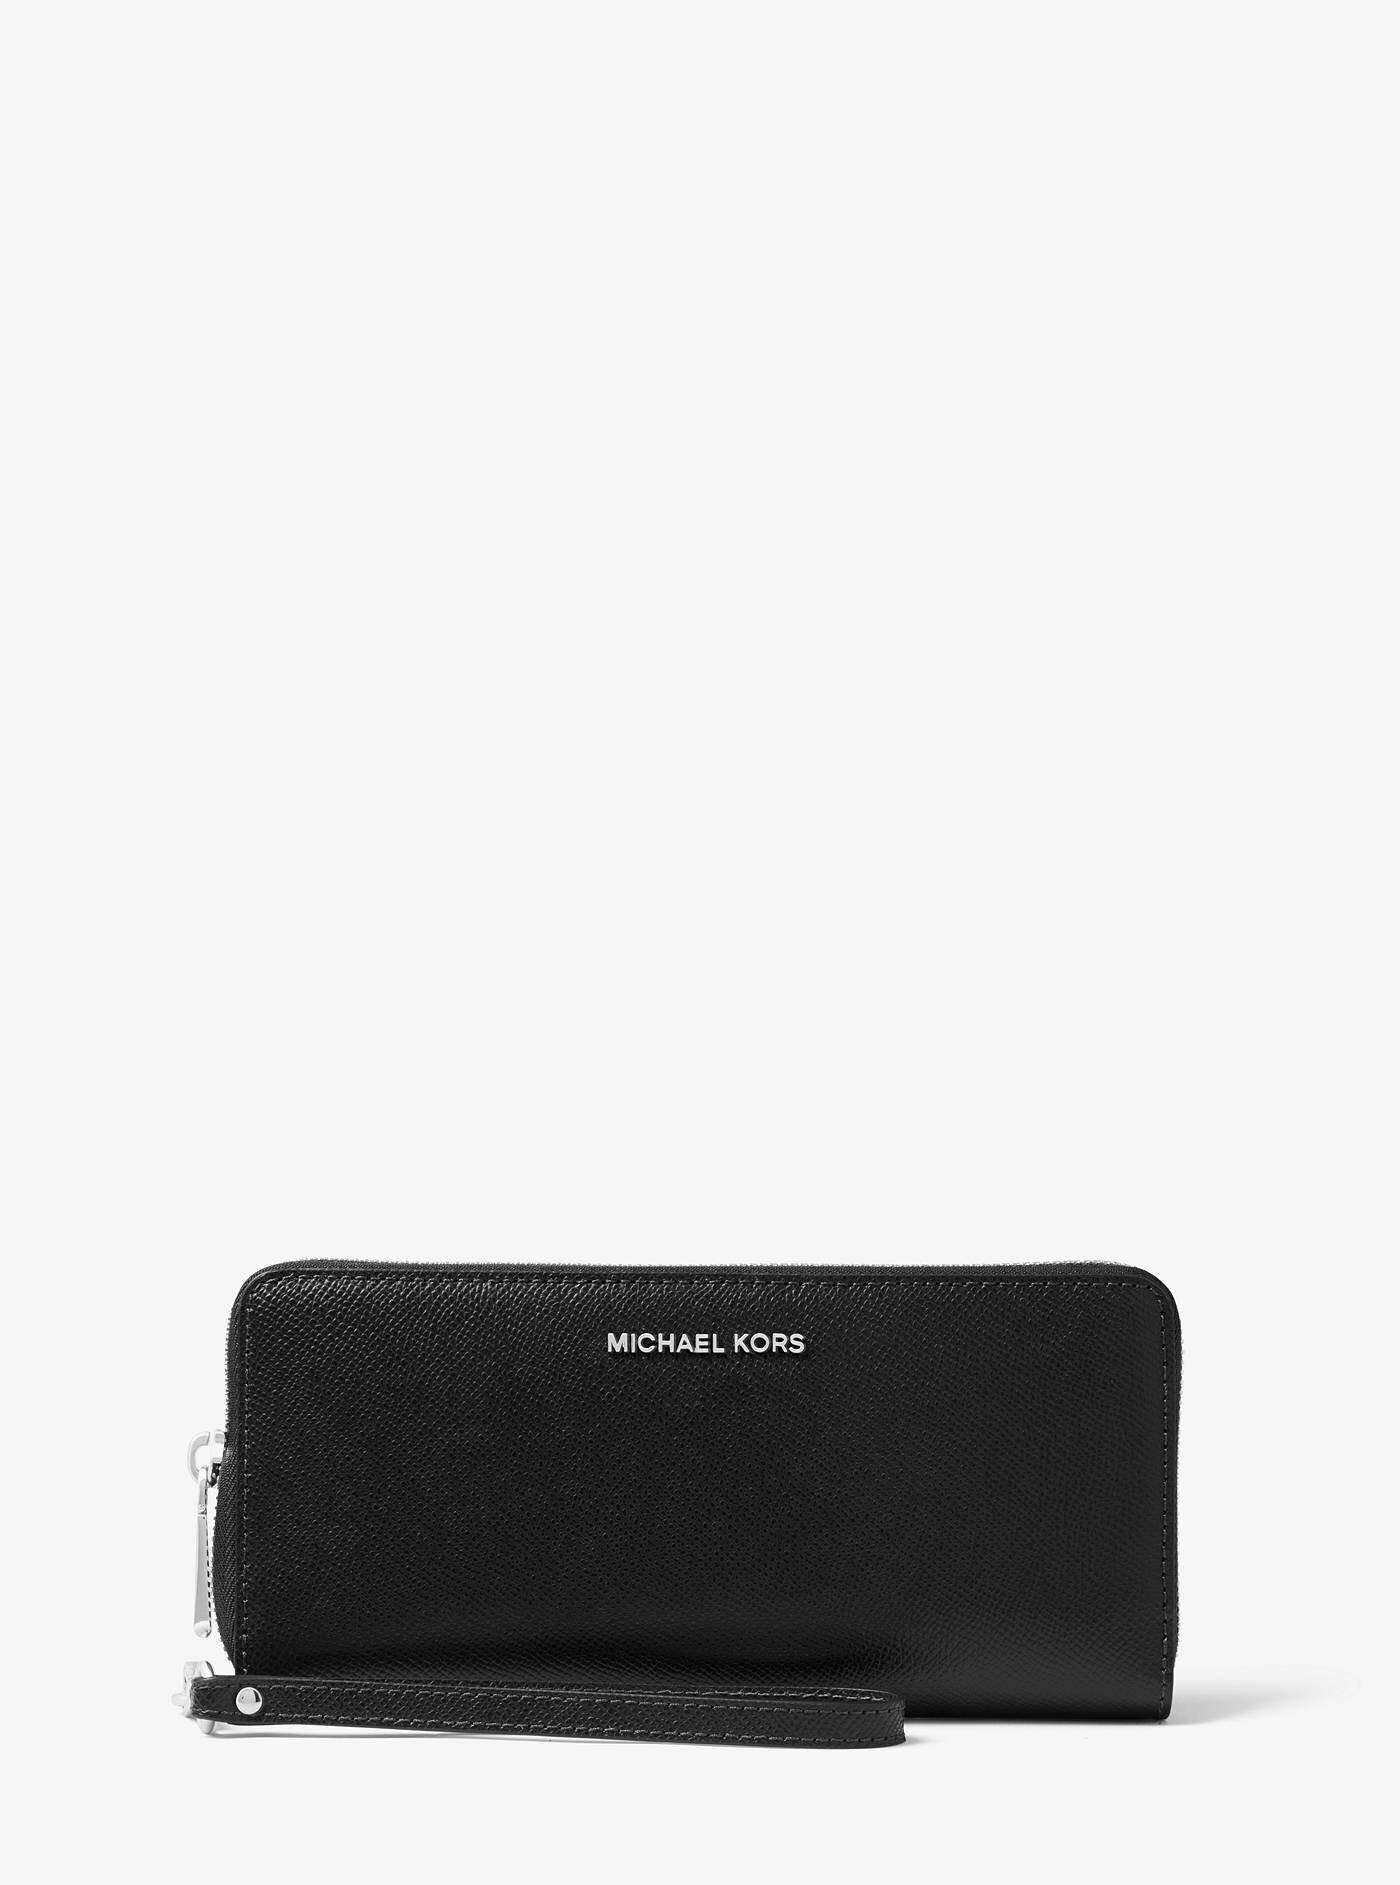 michael kors saffiano leather continental wallet